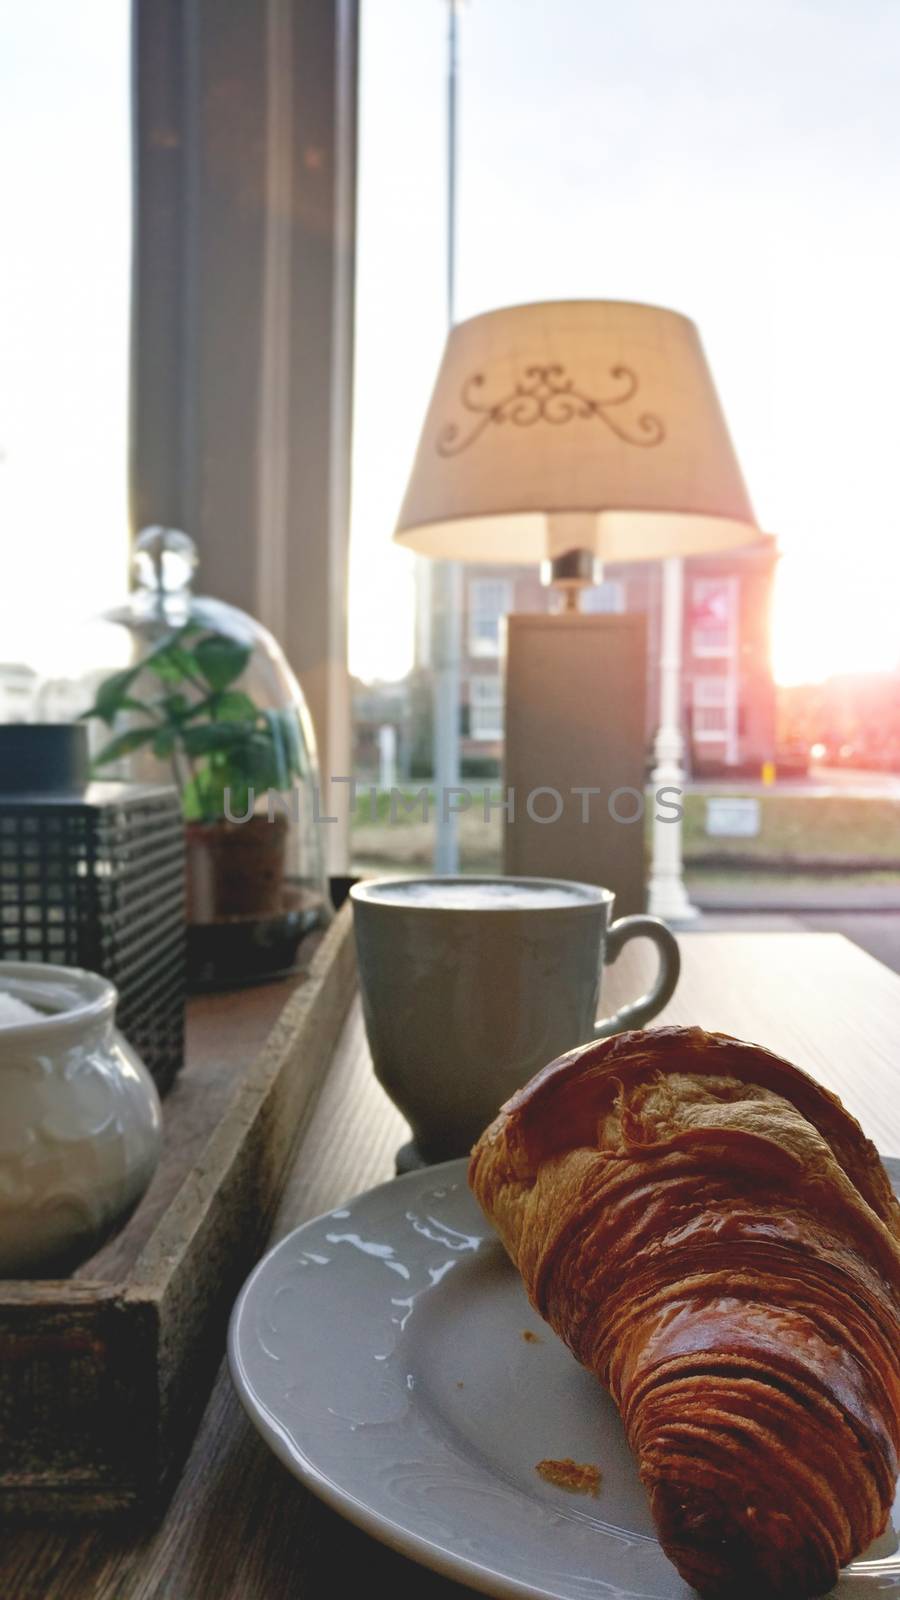 Cup of coffee and fresh baked croissants on plate for breakfast on the table by natali_brill